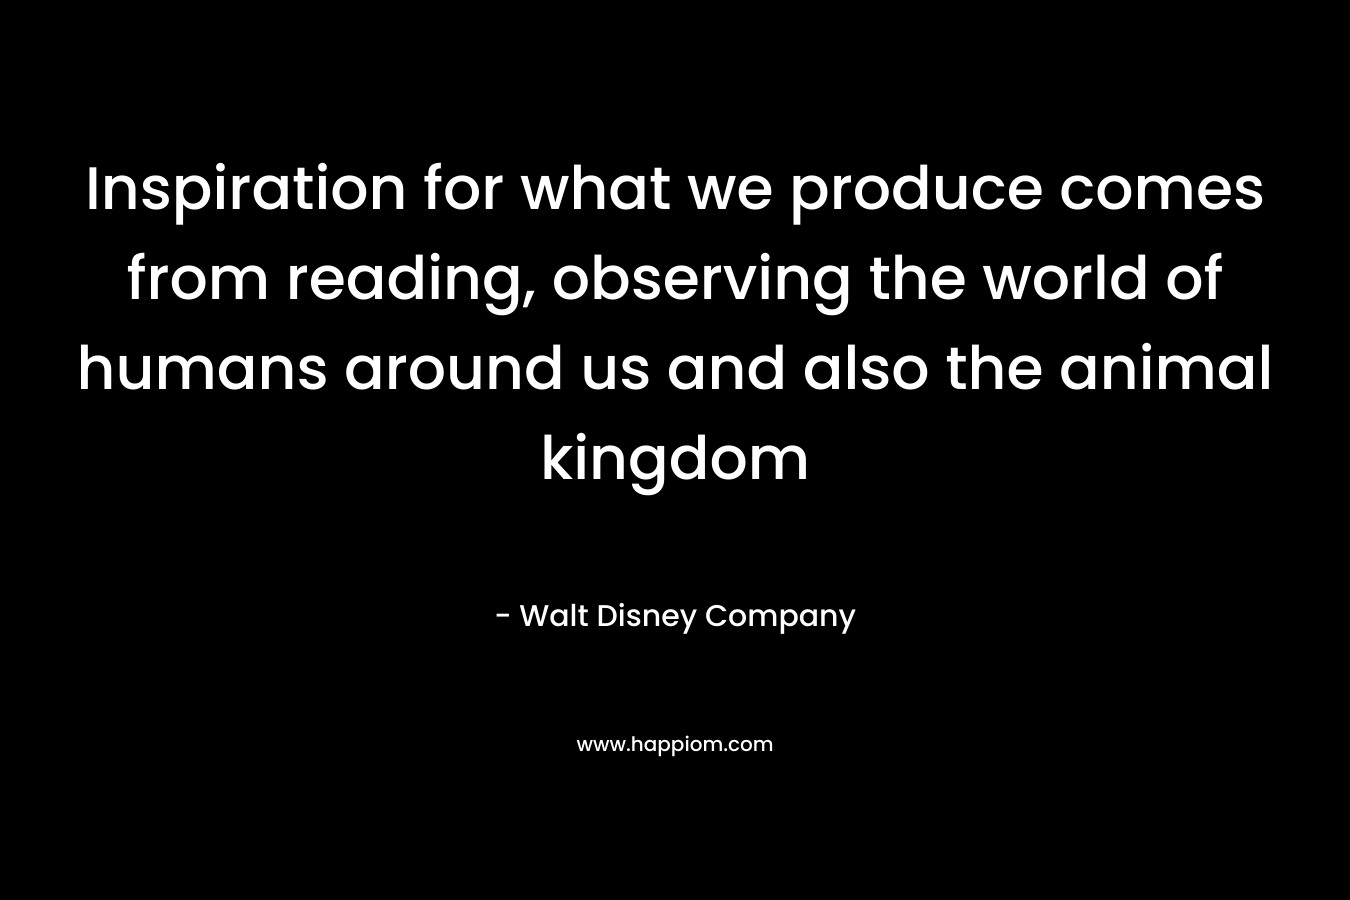 Inspiration for what we produce comes from reading, observing the world of humans around us and also the animal kingdom – Walt Disney Company